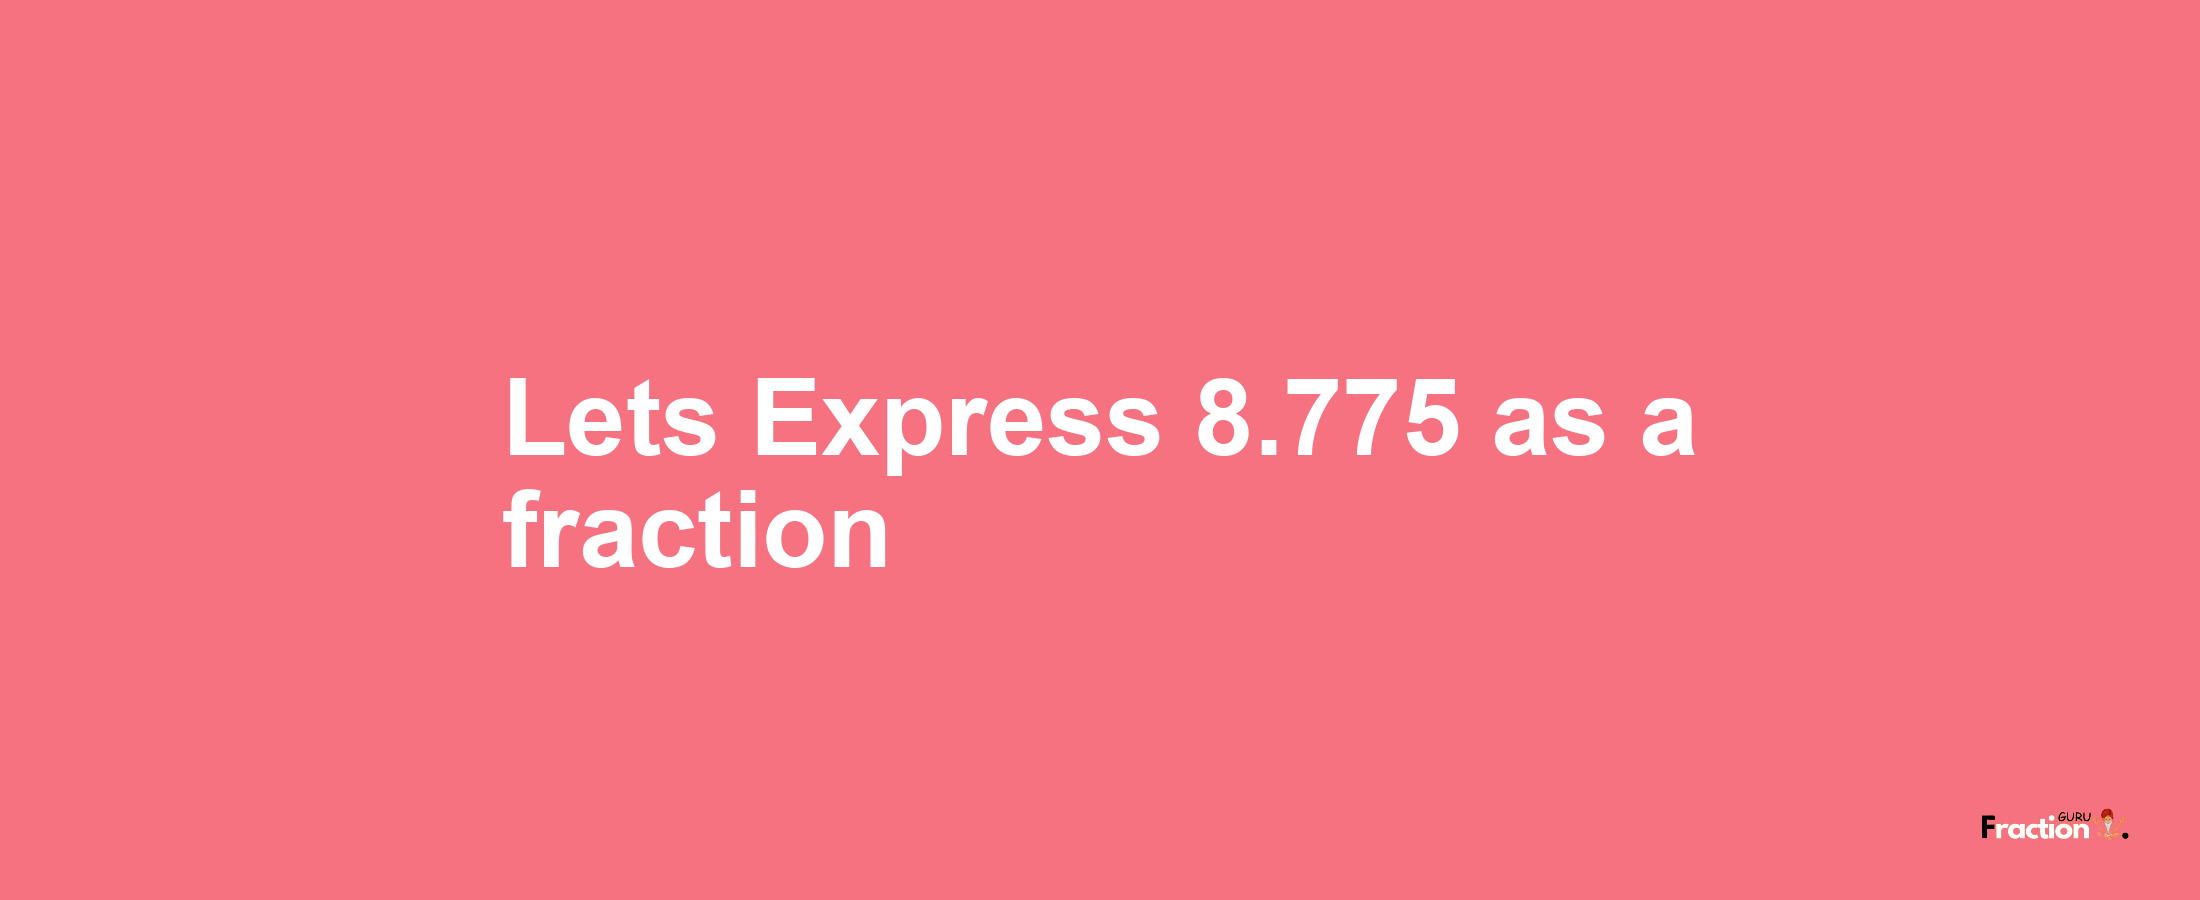 Lets Express 8.775 as afraction